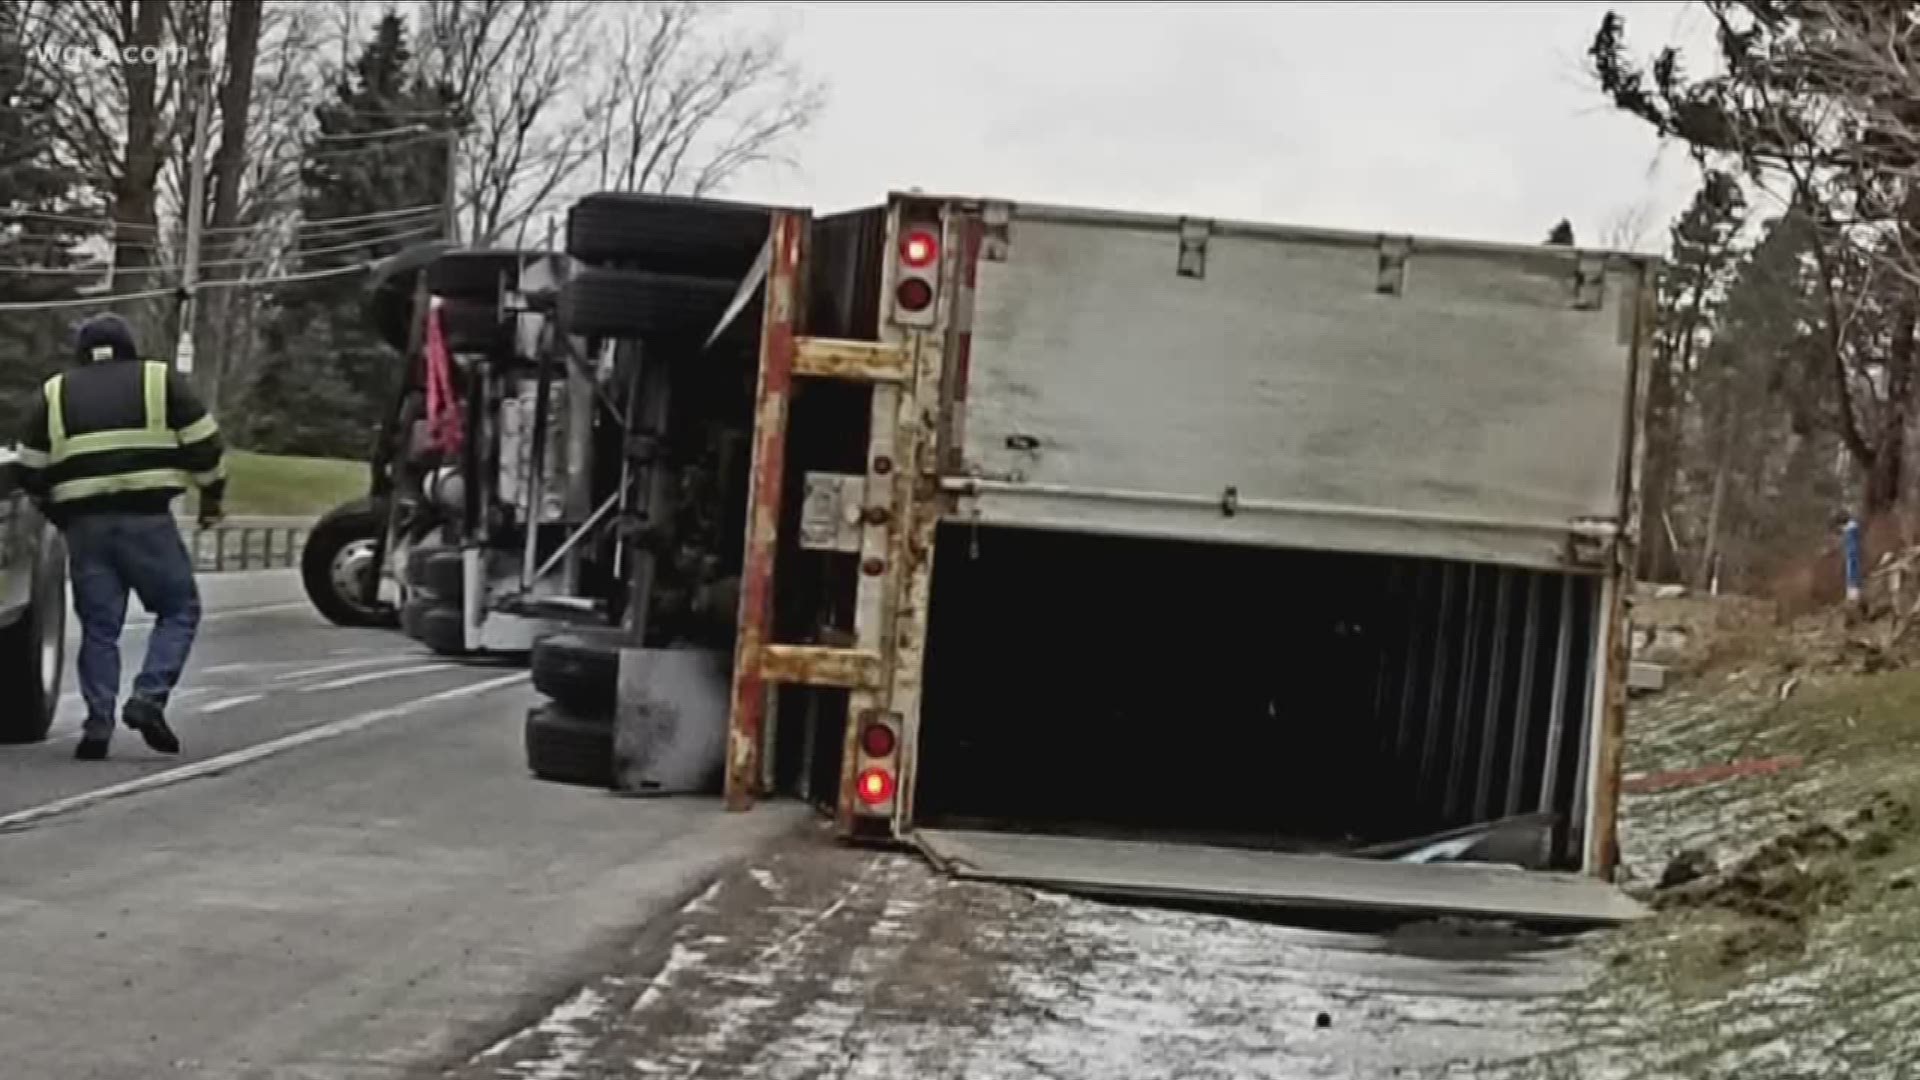 High winds cause tractor trailer to roll over on Route 77 in Corfu.